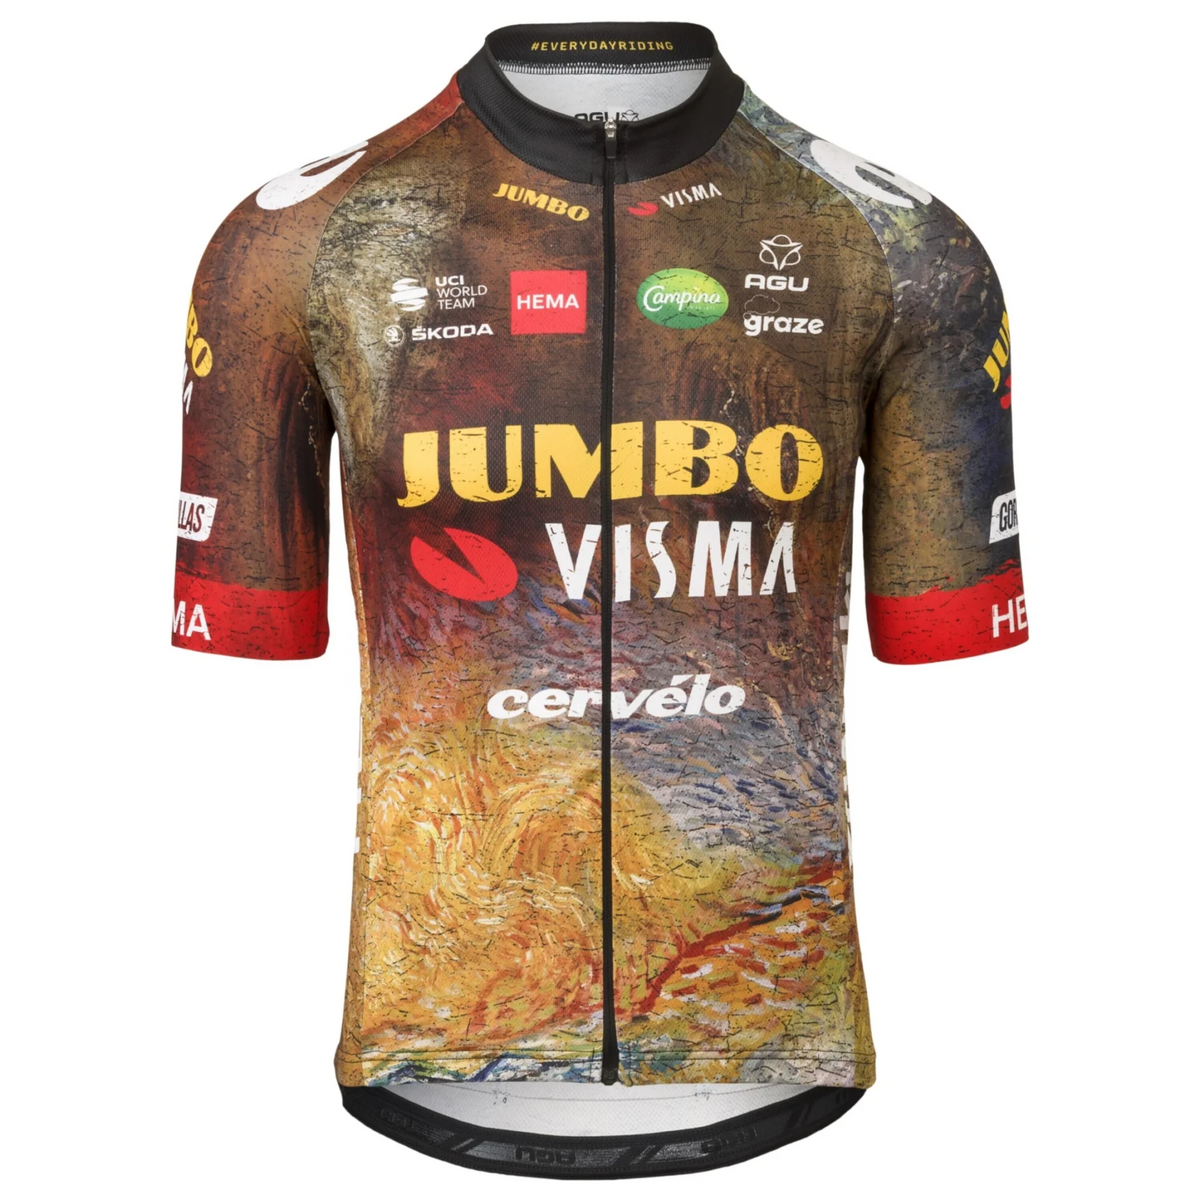 Nutrition for Jumbo Visma in the Tour